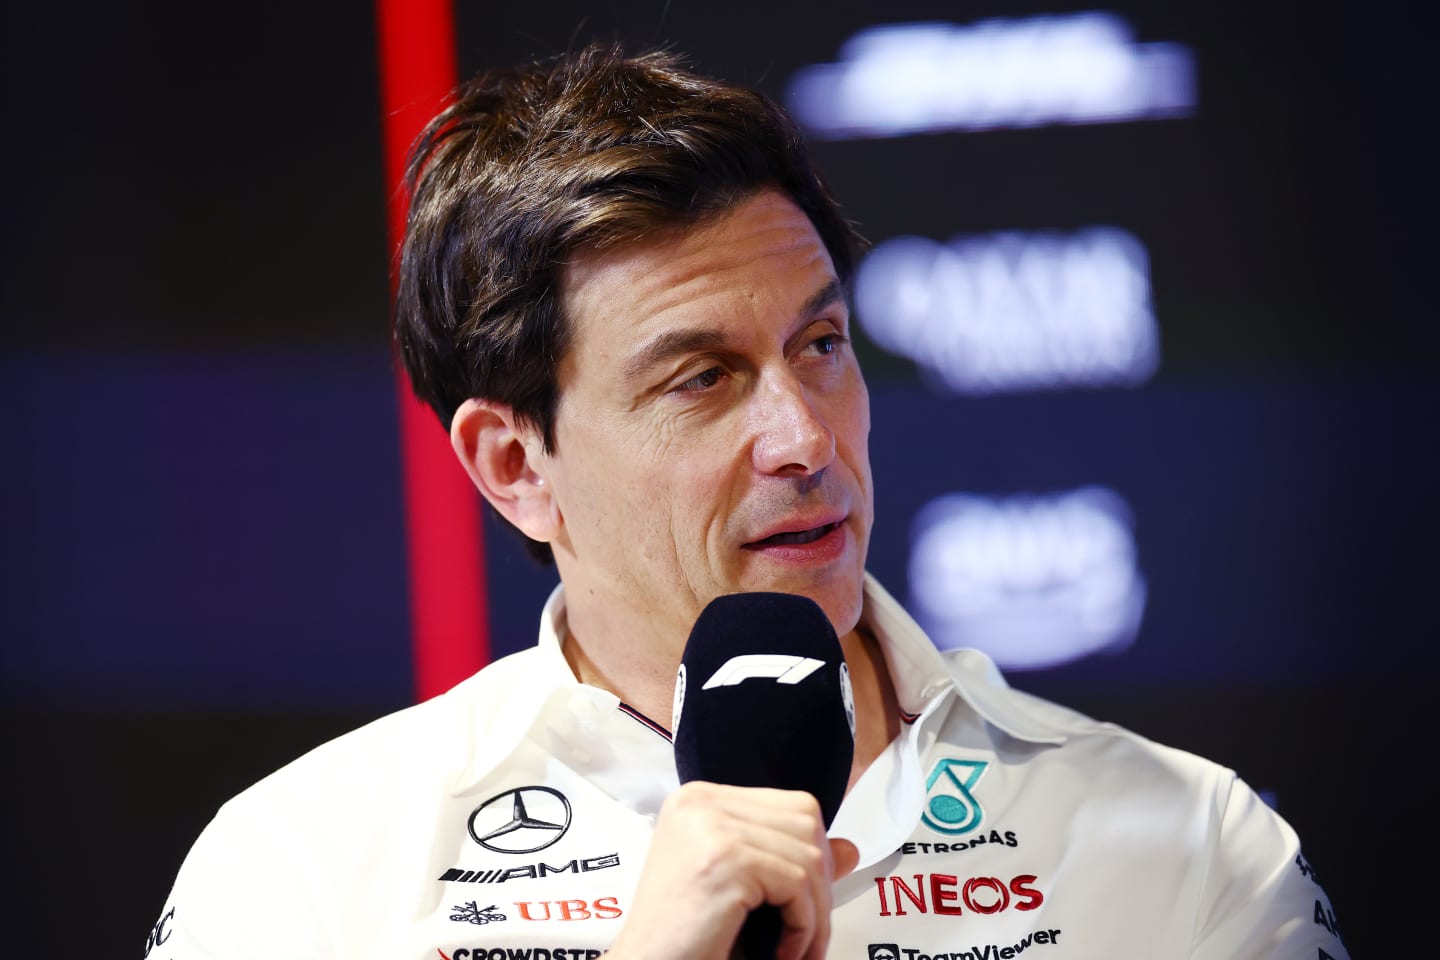 JEDDAH, SAUDI ARABIA - MARCH 17: Mercedes GP Executive Director Toto Wolff attends the Team Principals Press Conference during practice ahead of the F1 Grand Prix of Saudi Arabia at Jeddah Corniche Circuit on March 17, 2023 in Jeddah, Saudi Arabia. (Photo by Bryn Lennon/Getty Images)